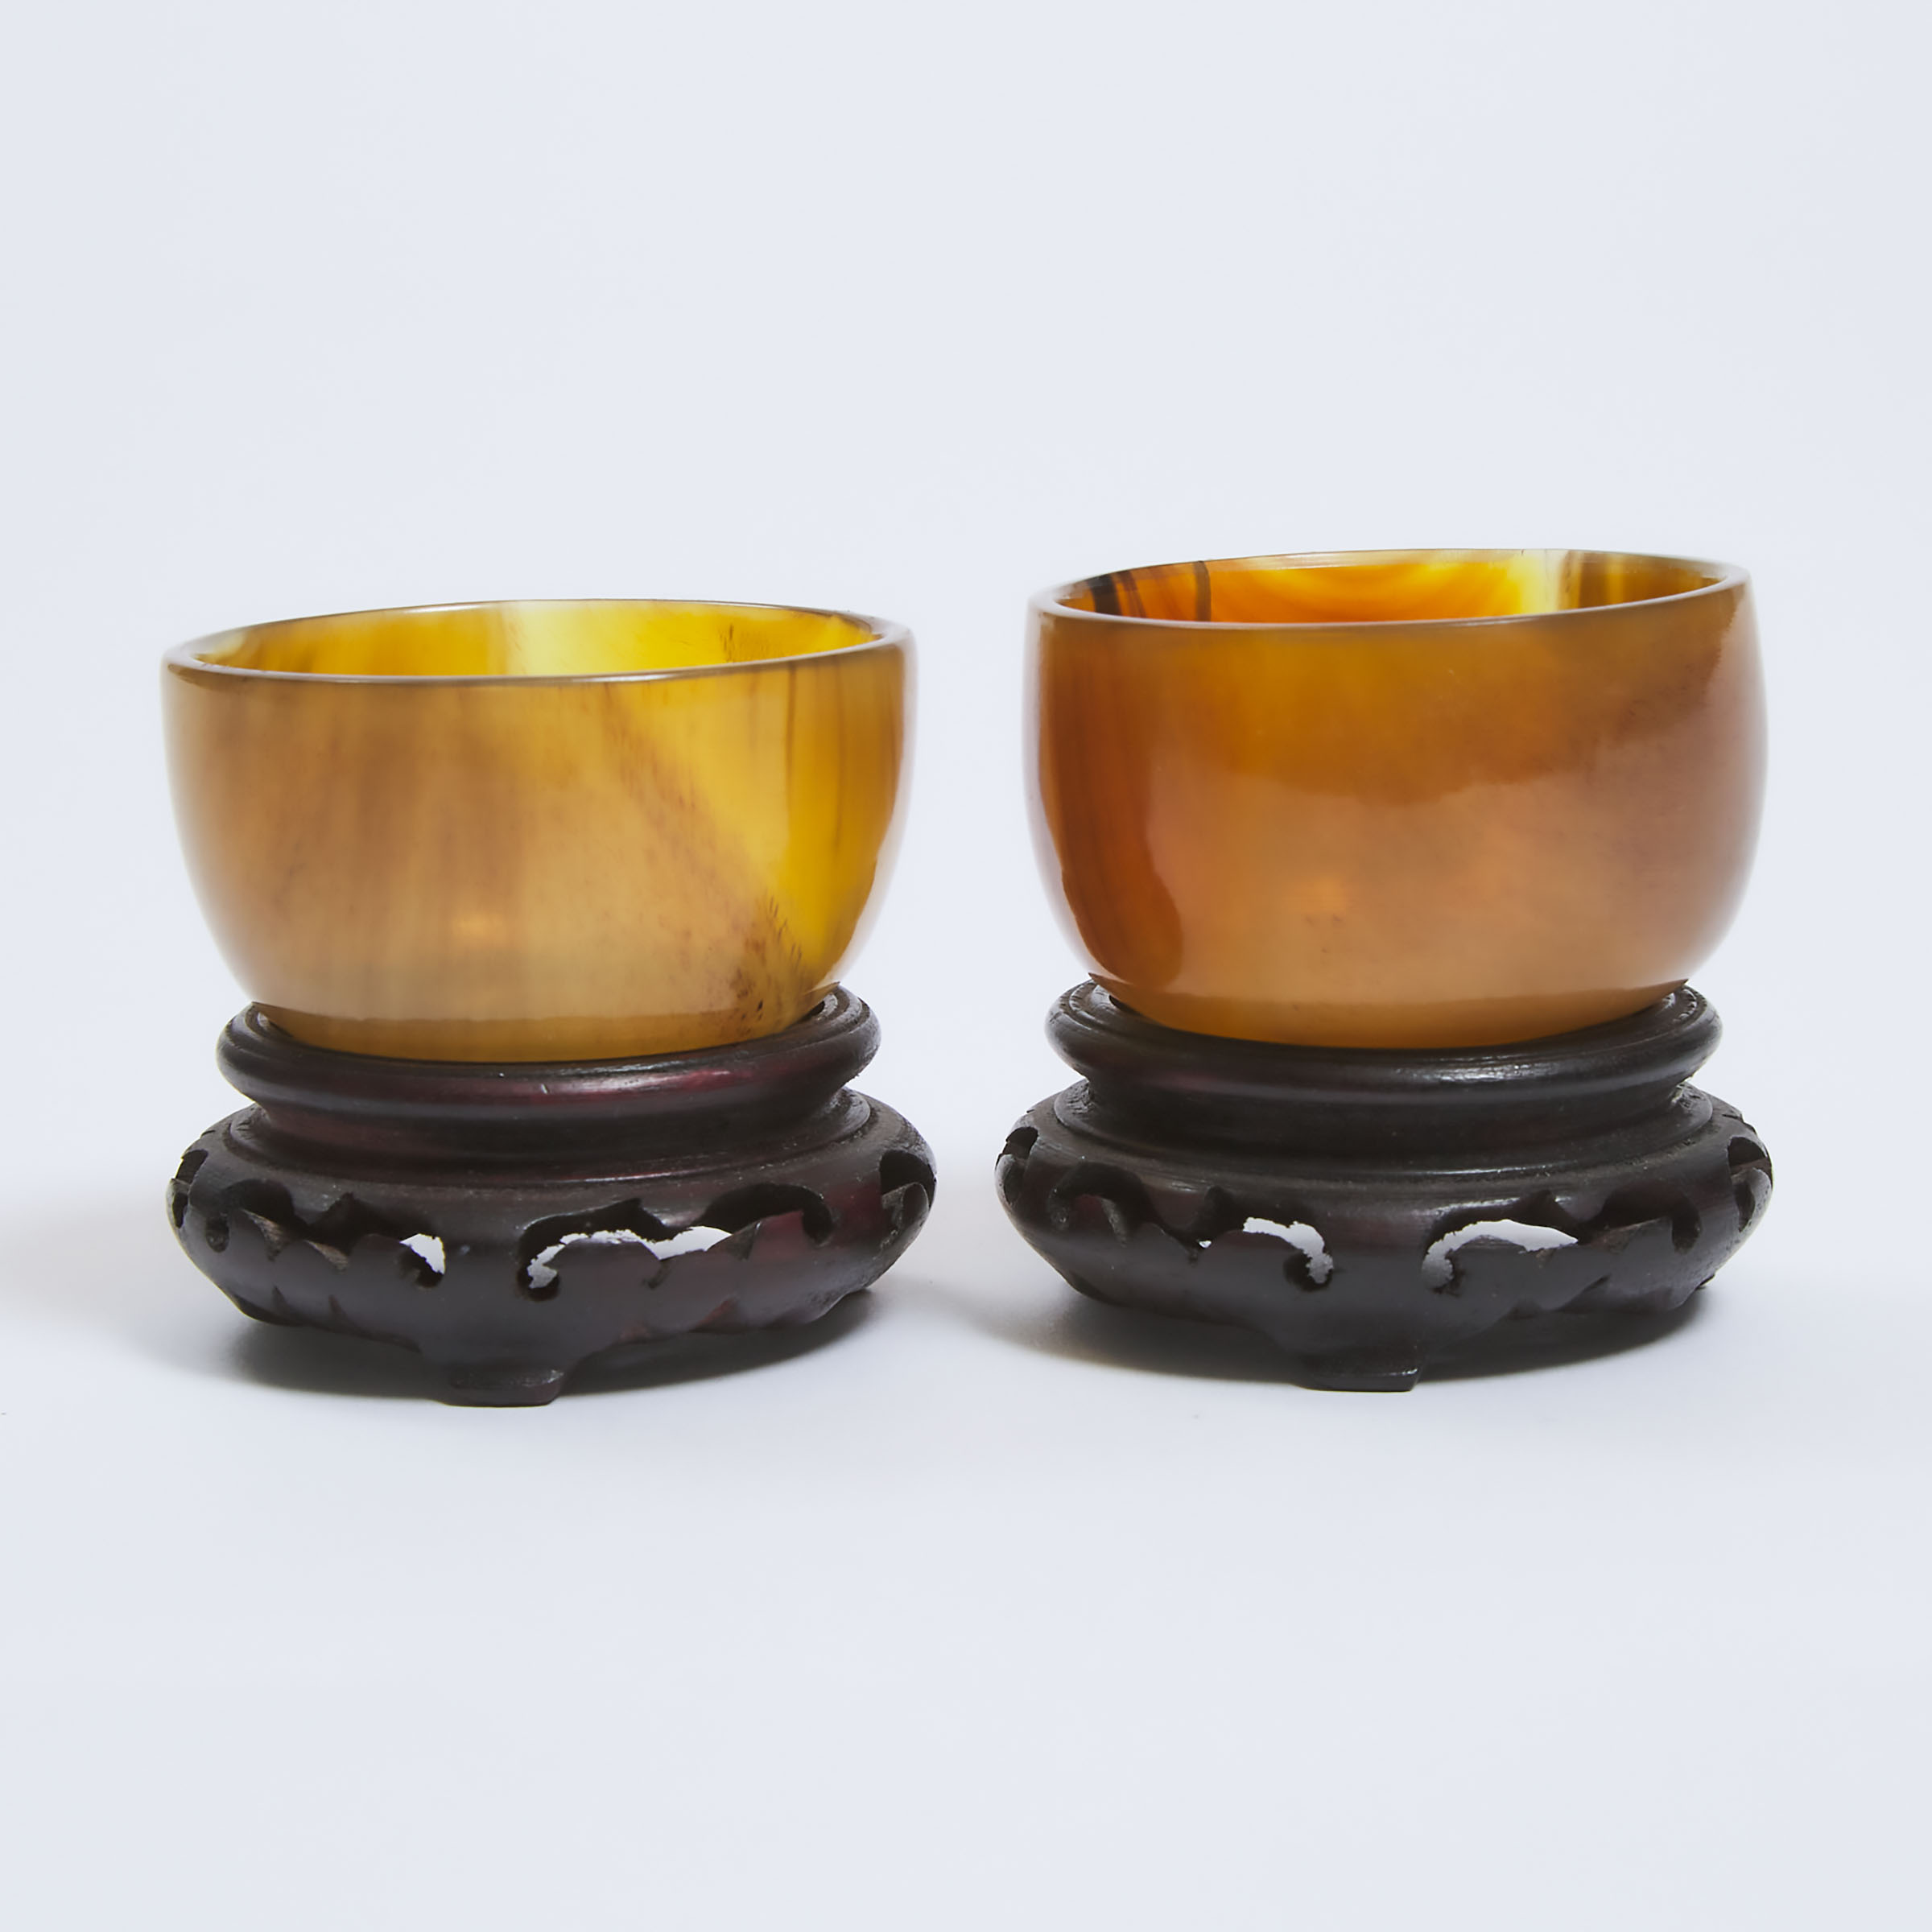 A Pair of Horn Cups, Early to Mid 20th Century